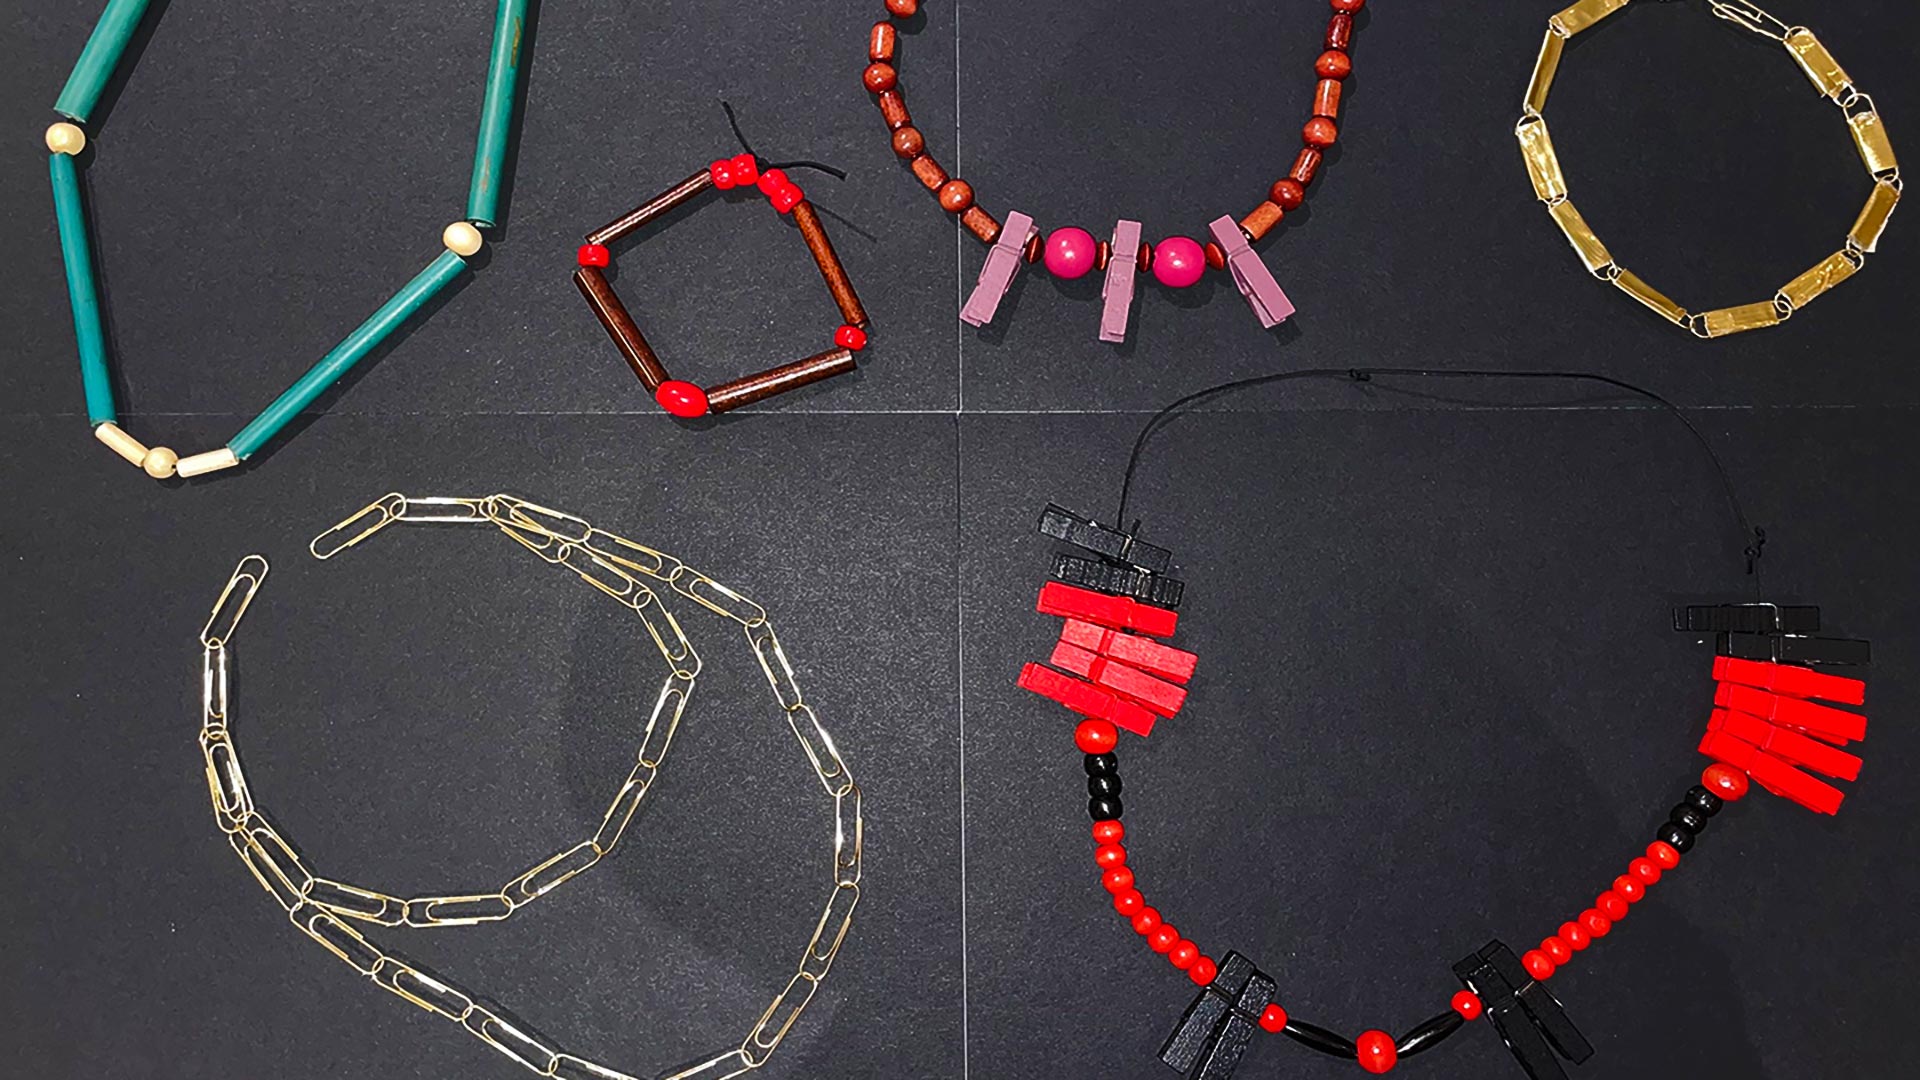 Six handmade necklaces made of multicolored paperclips, wooden beads, and clothespins